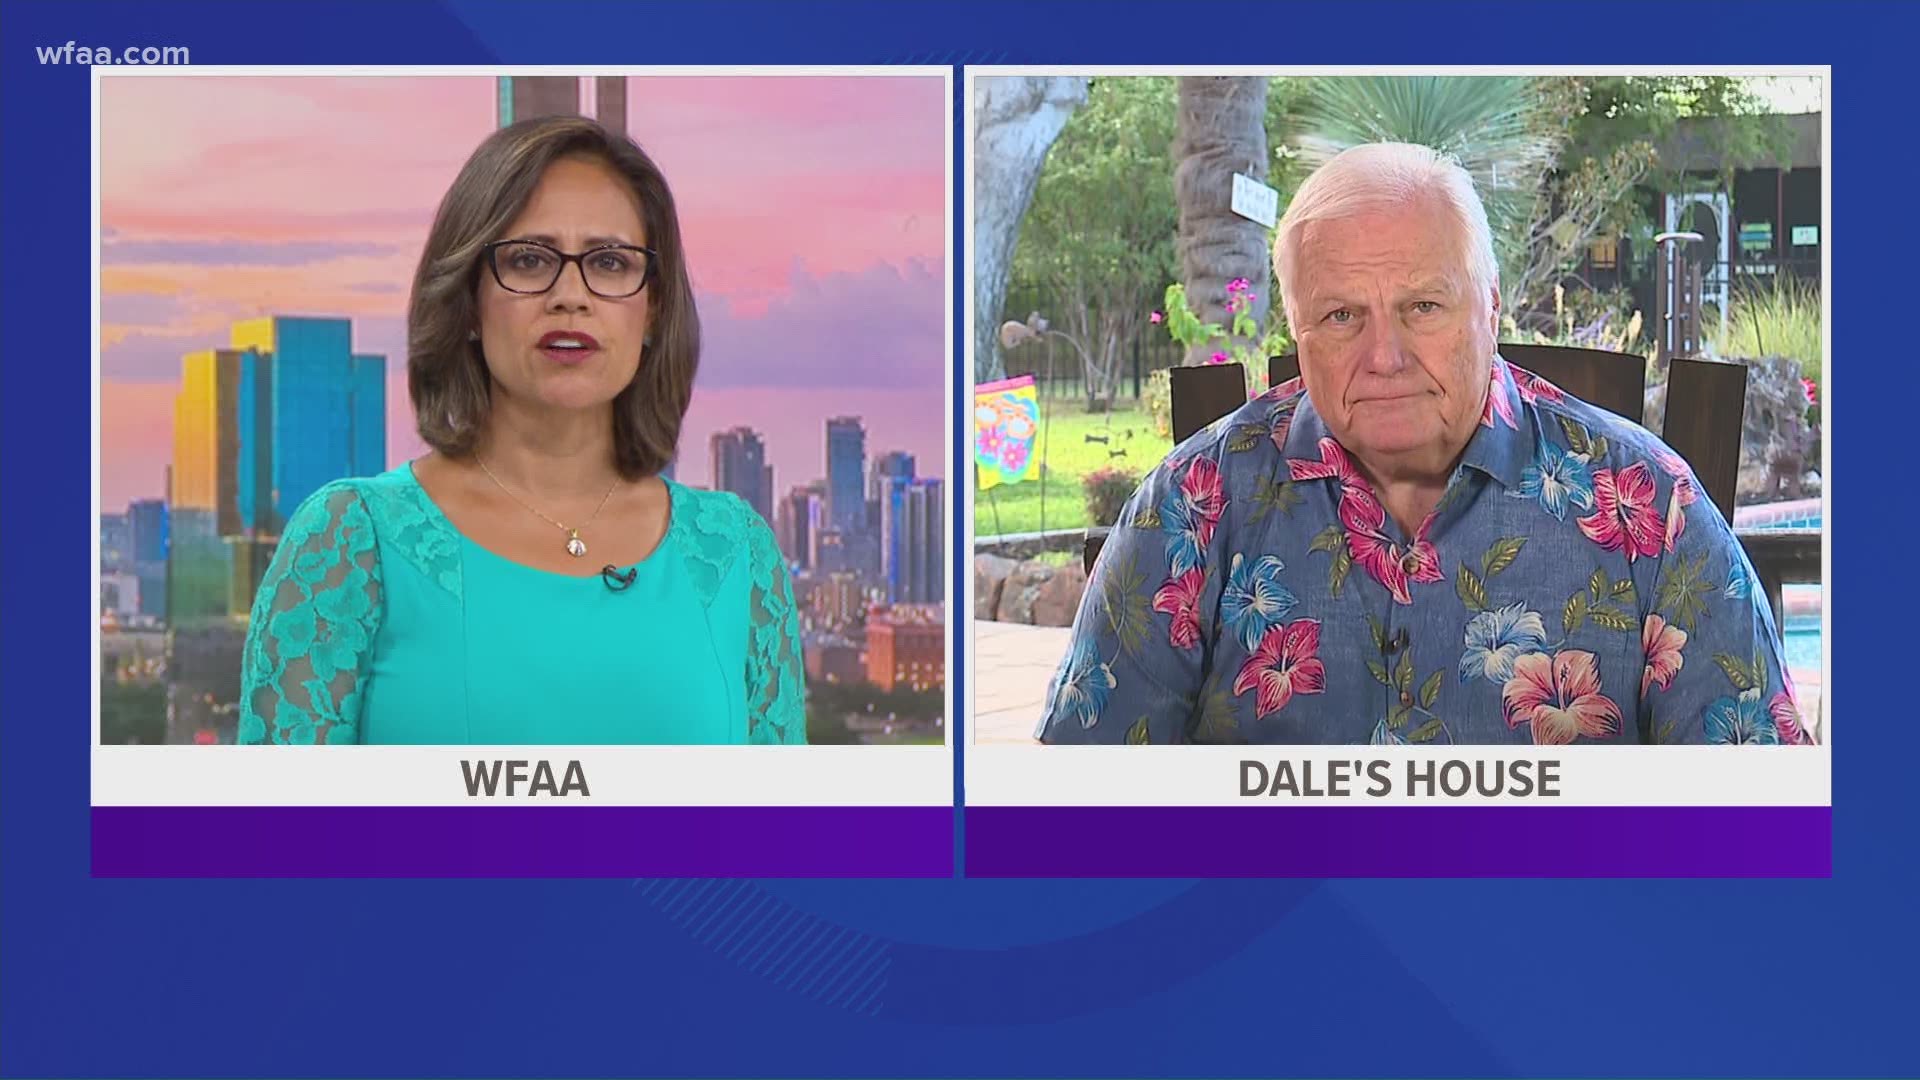 Dale Hansen discusses how his Unplugged segments get lots of social media reaction. He talks about why he continues to speak out.